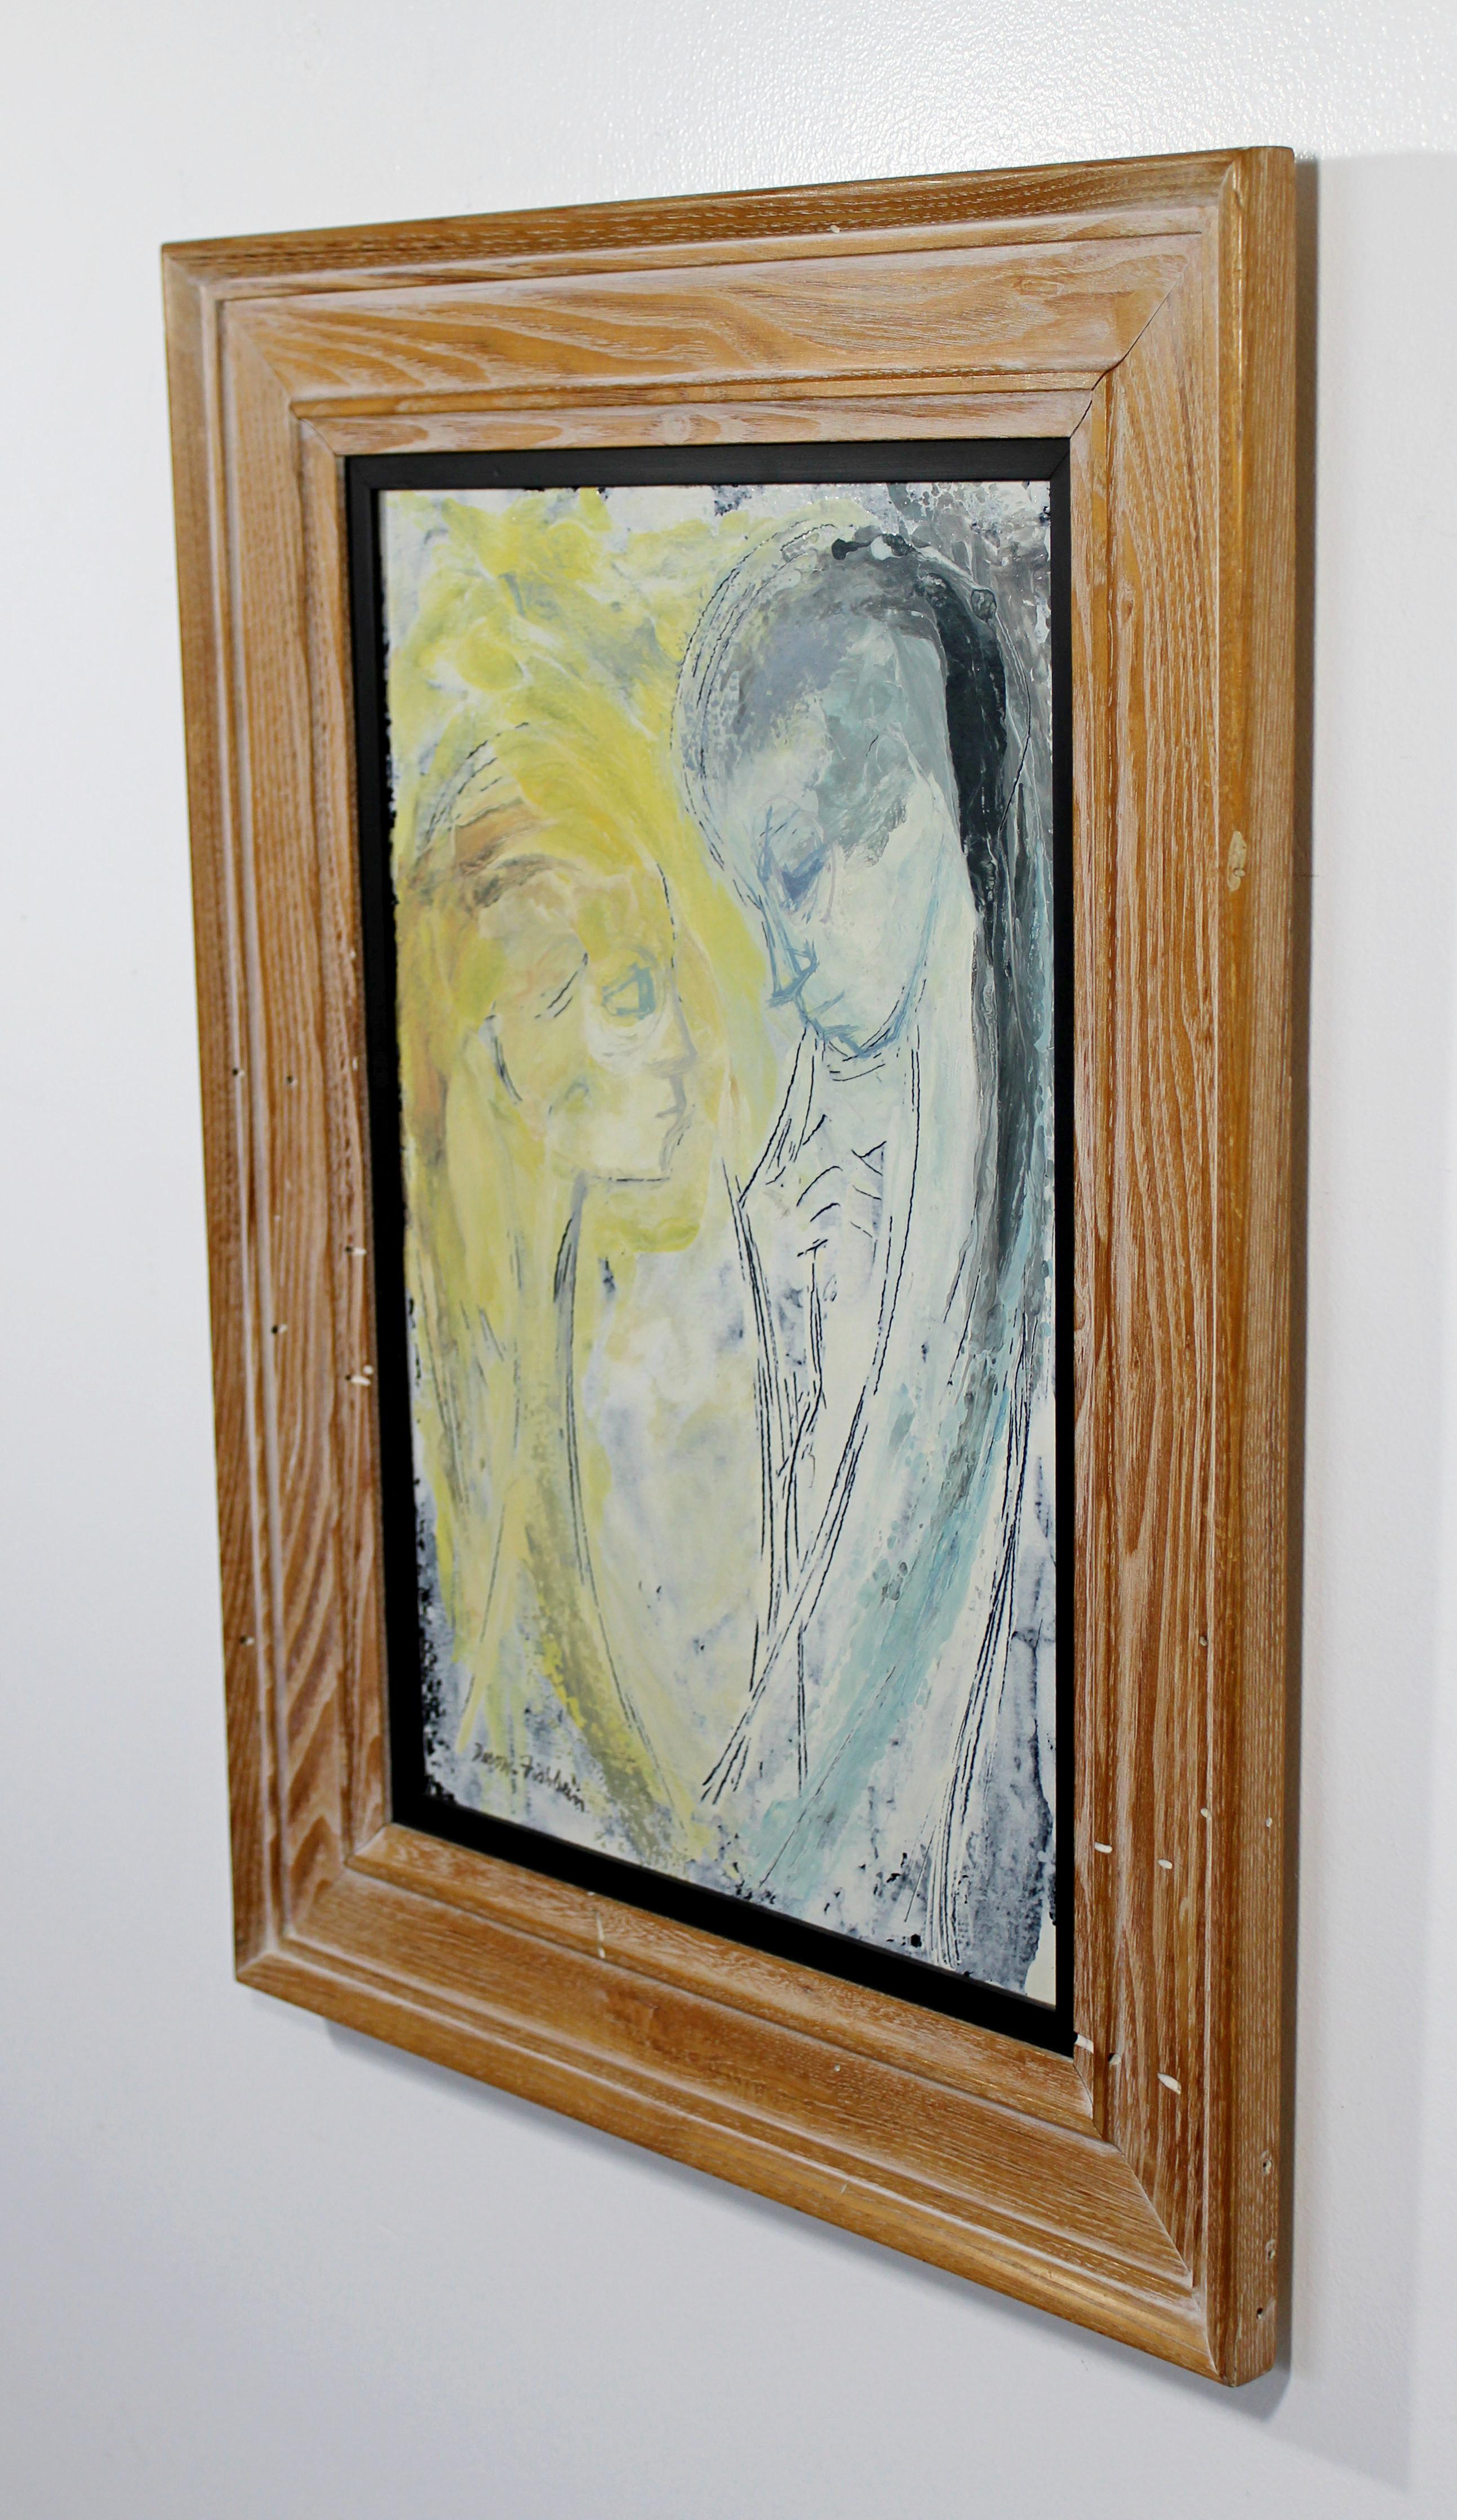 For your consideration is a deeply emotional painting by Lillian Desow-Fishbein, of an embracing couple, signed and framed. In excellent condition. The dimensions of the frame are 18.5